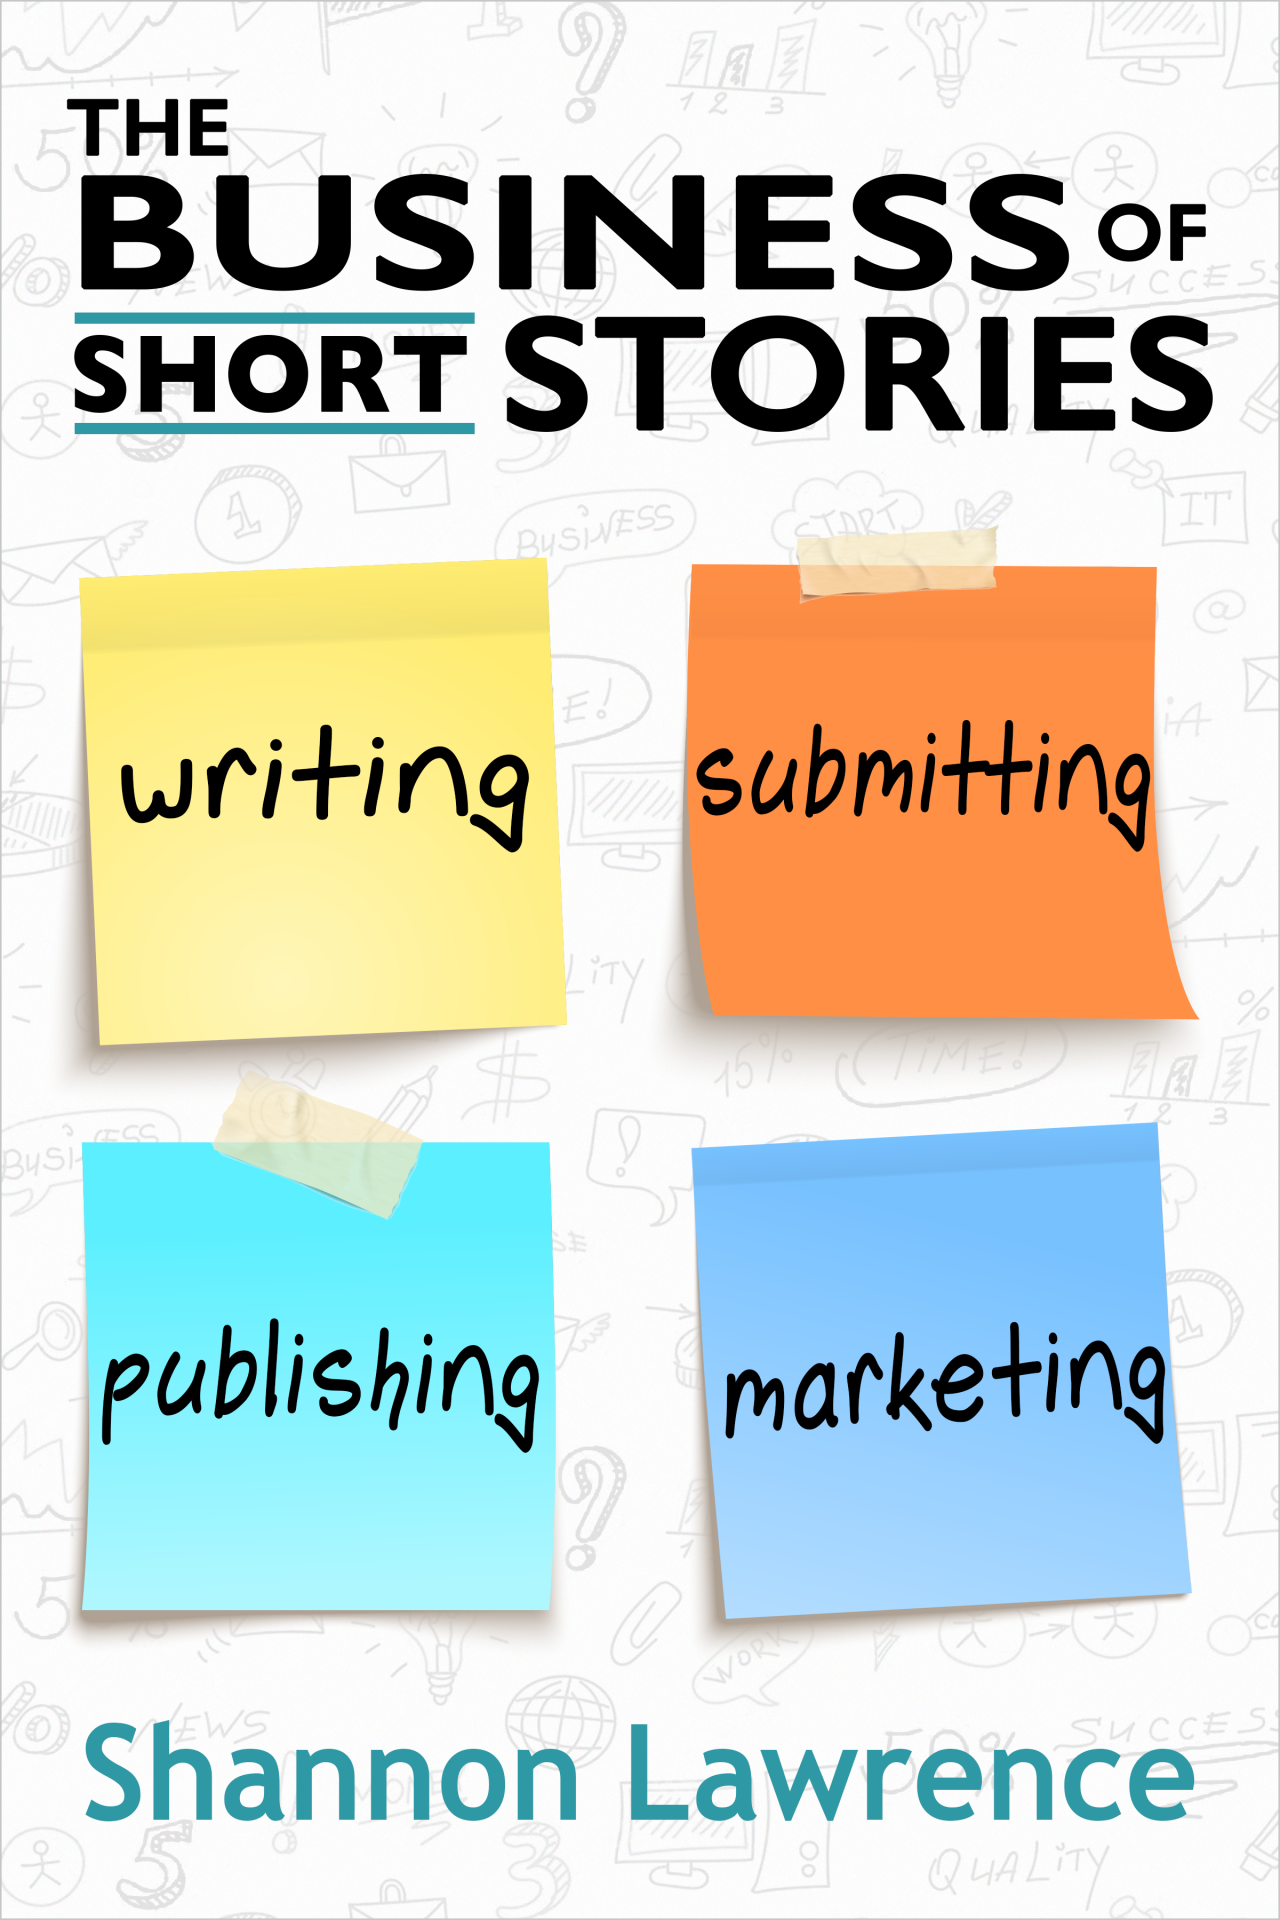 Business of Short Stories Shannon Lawrence 2D Cover